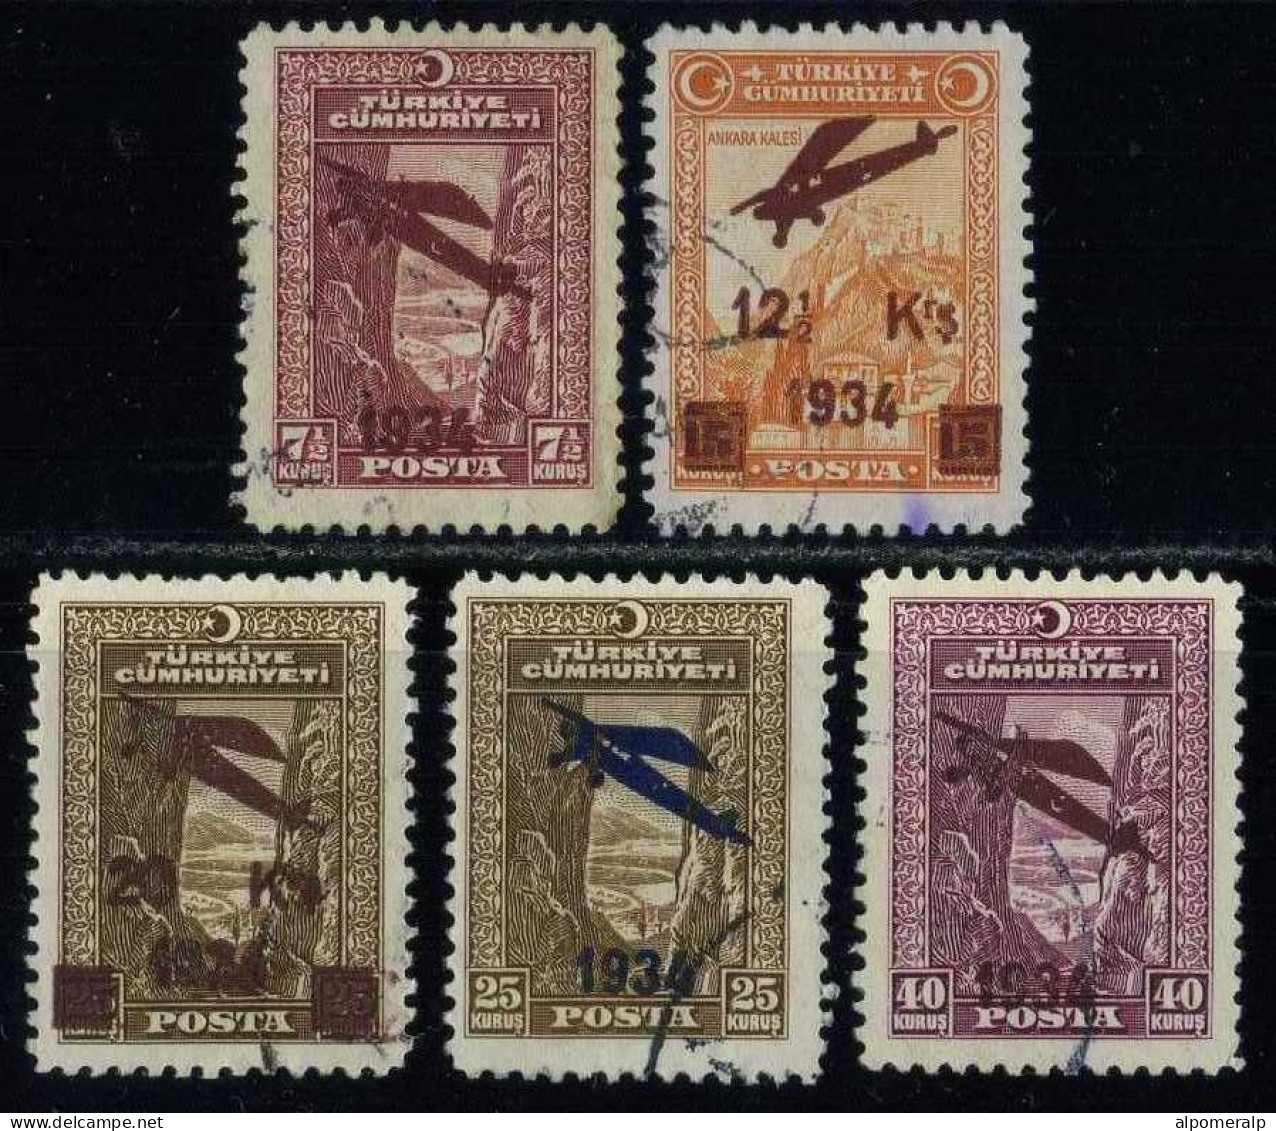 Türkiye 1934 Mi 980-984 Airmail Stamps First Issue, Opening Of The Ankara-Istanbul Airmail Line - Used Stamps